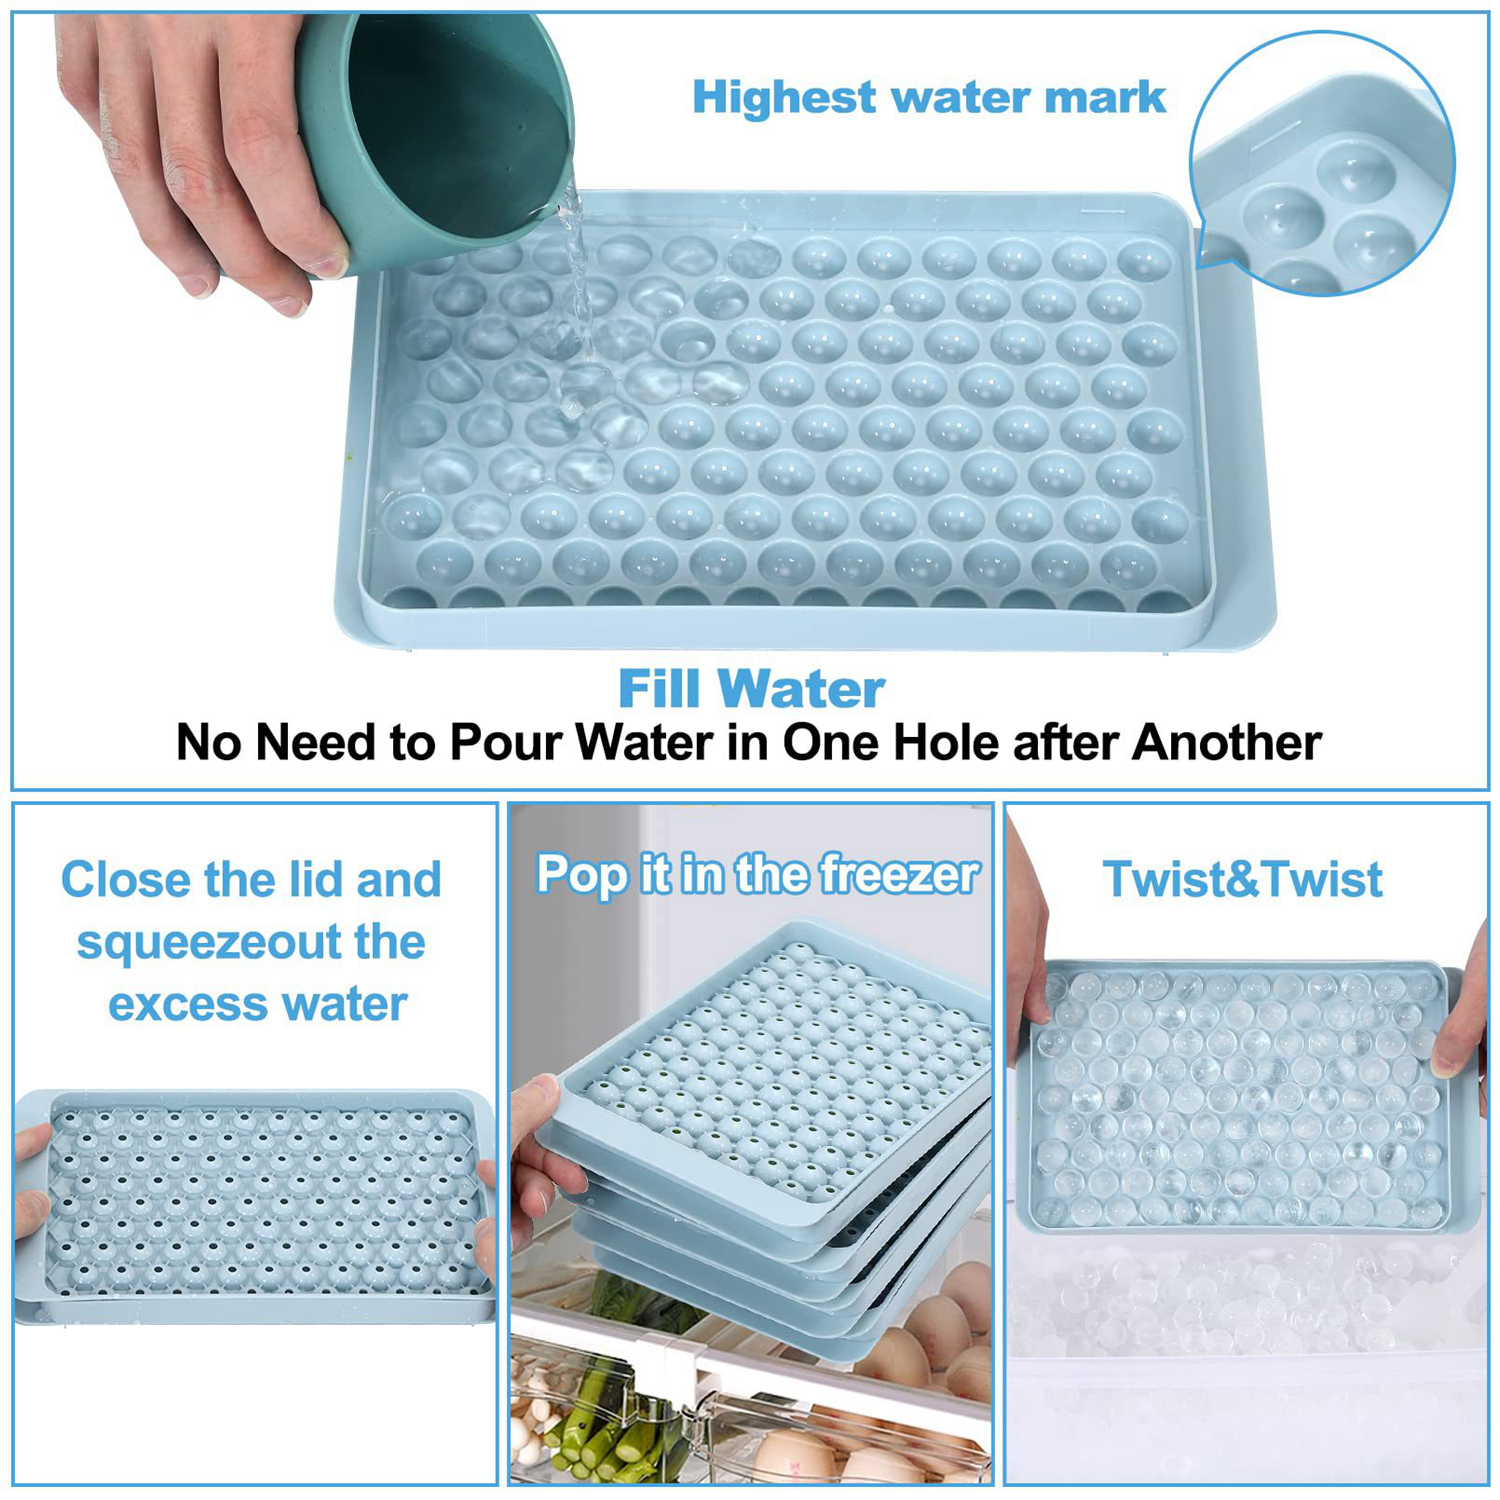 Camco 44100 Ice Cube Tray, Blue, 9 Inch Lenth By 4 Inch Width By 2 Inch  Height: RV Housewares (014717441001-1)